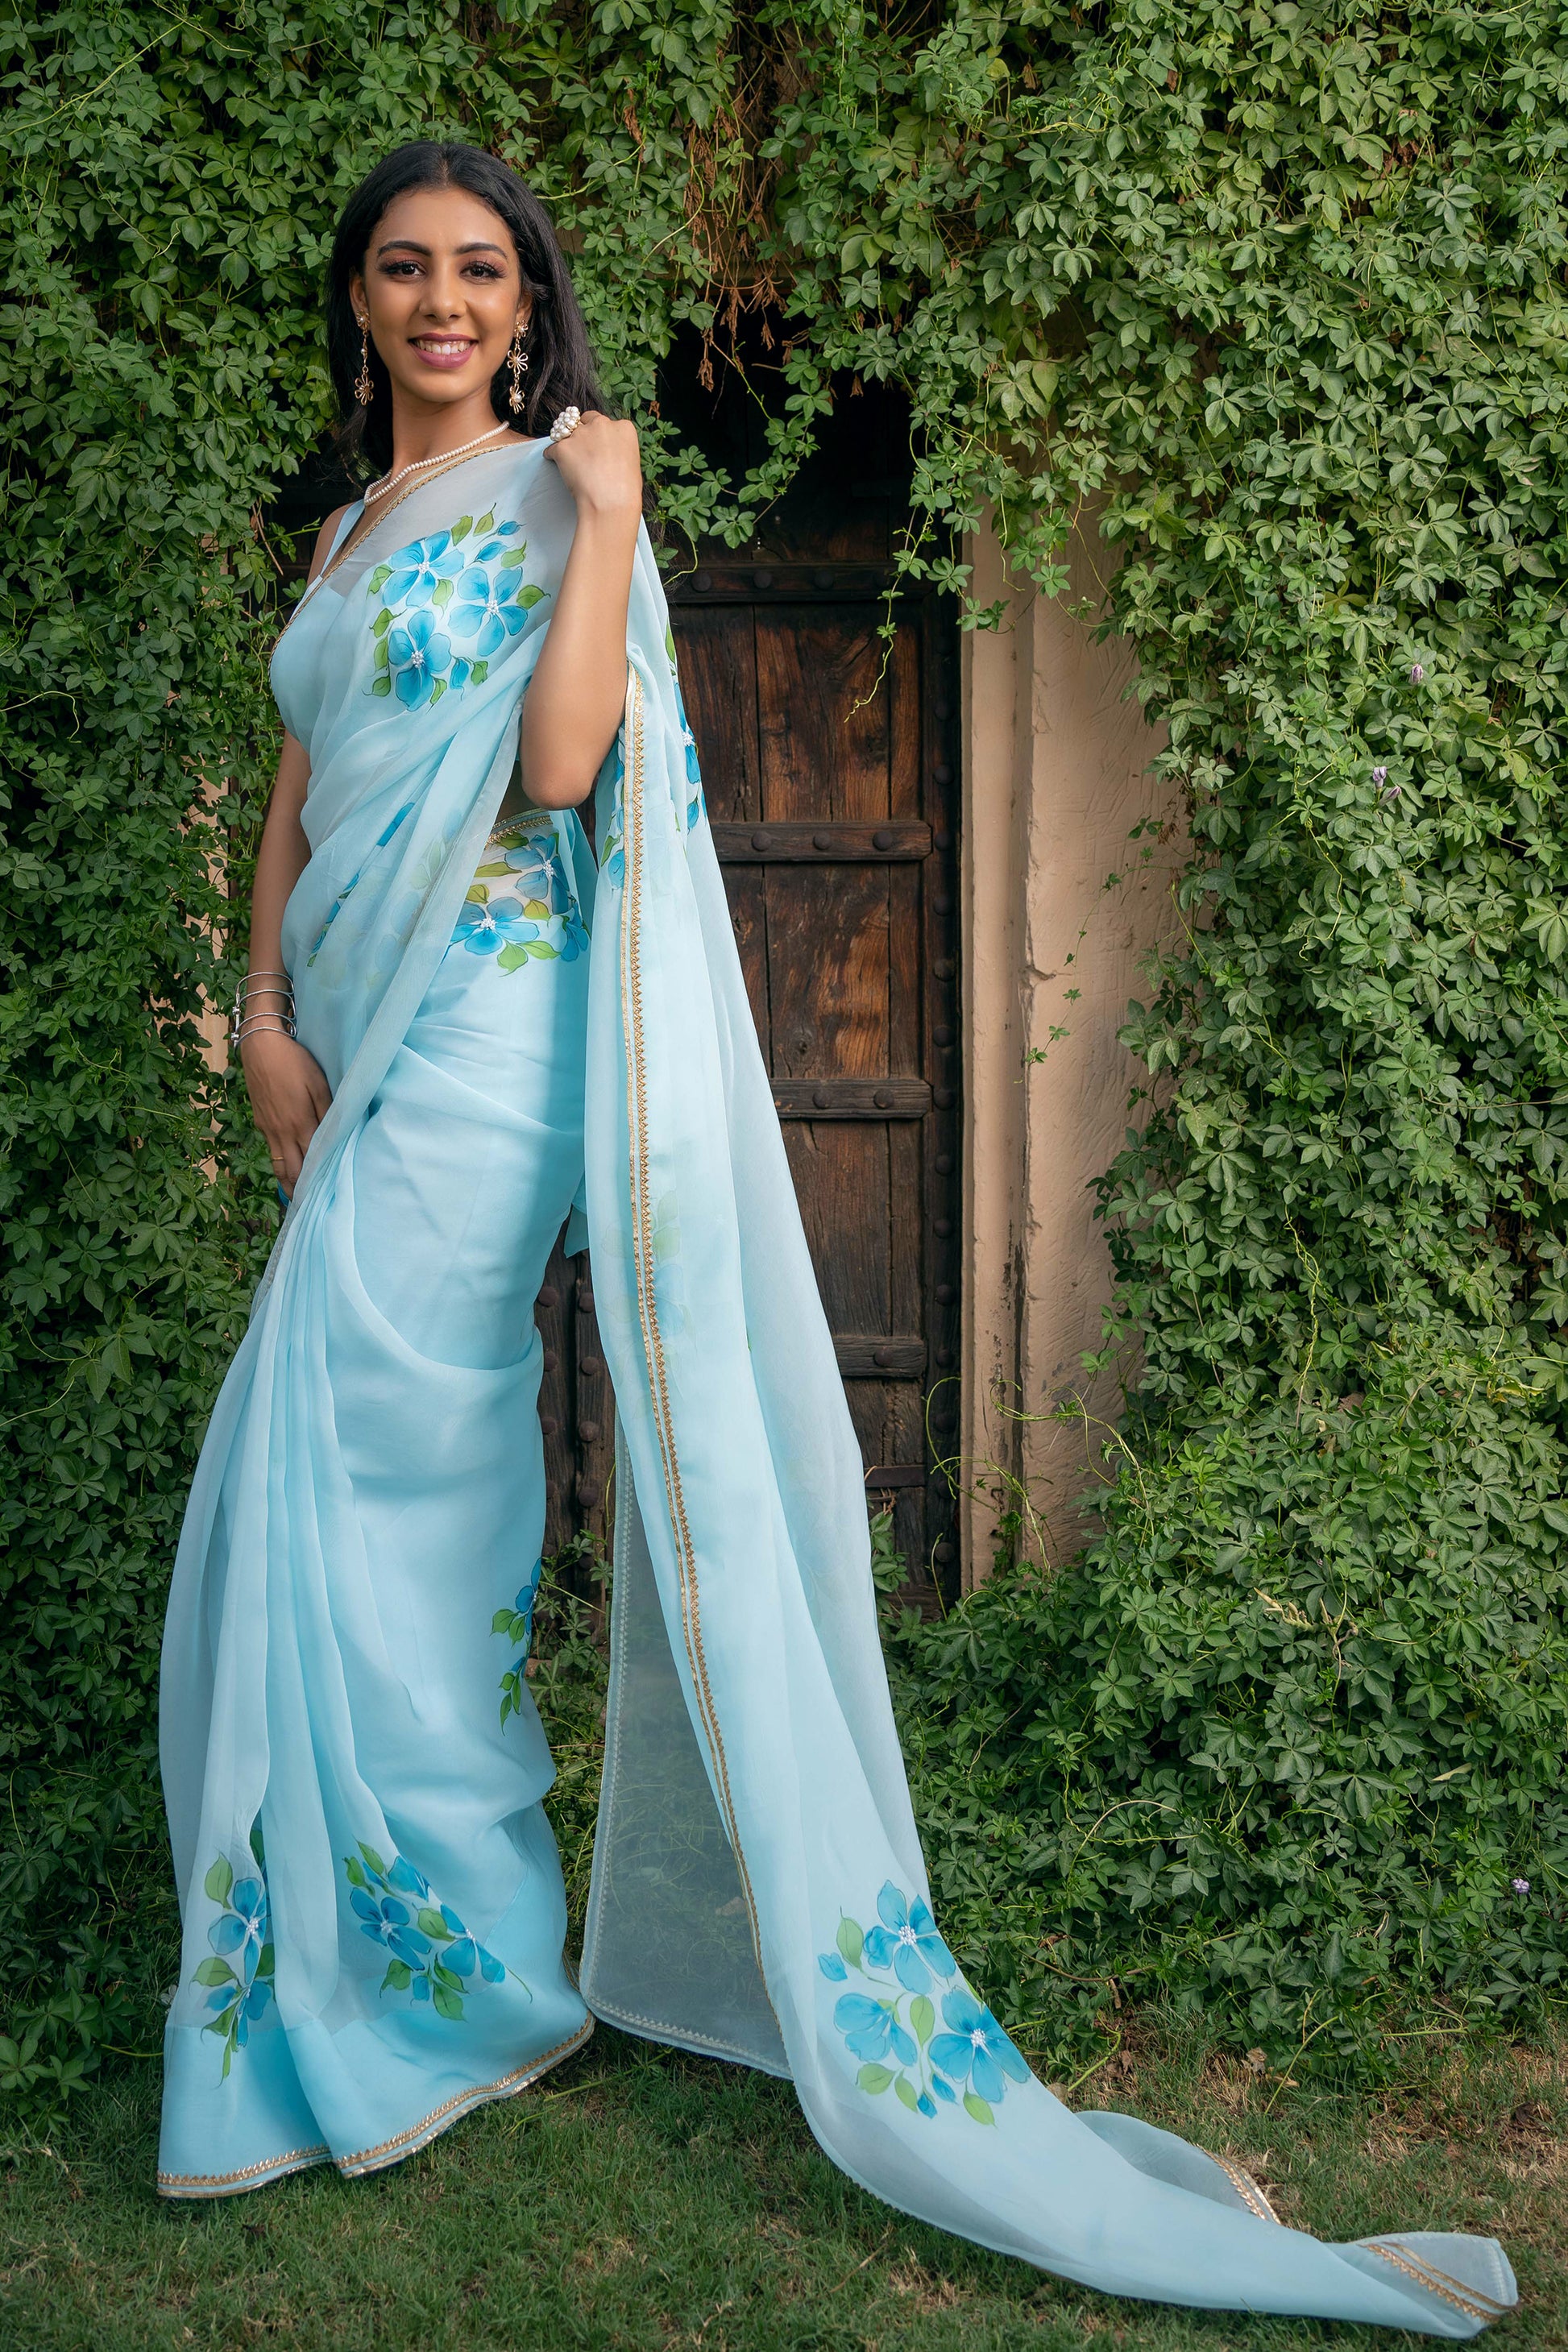 Capture the essence of elegance with this light turquoise Plumeria hand-painted organza saree from our latest collection. This handwork saree is the most popular and trending saree designs. Complete with a stitched blouse, this fancy organza saree is a testament to timeless beauty, reminiscent of Bollywood and Sabyasachi styles. Elevate your wardrobe with this beautiful handloom saree, the epitome of sophistication and grace, now available in our latest design series